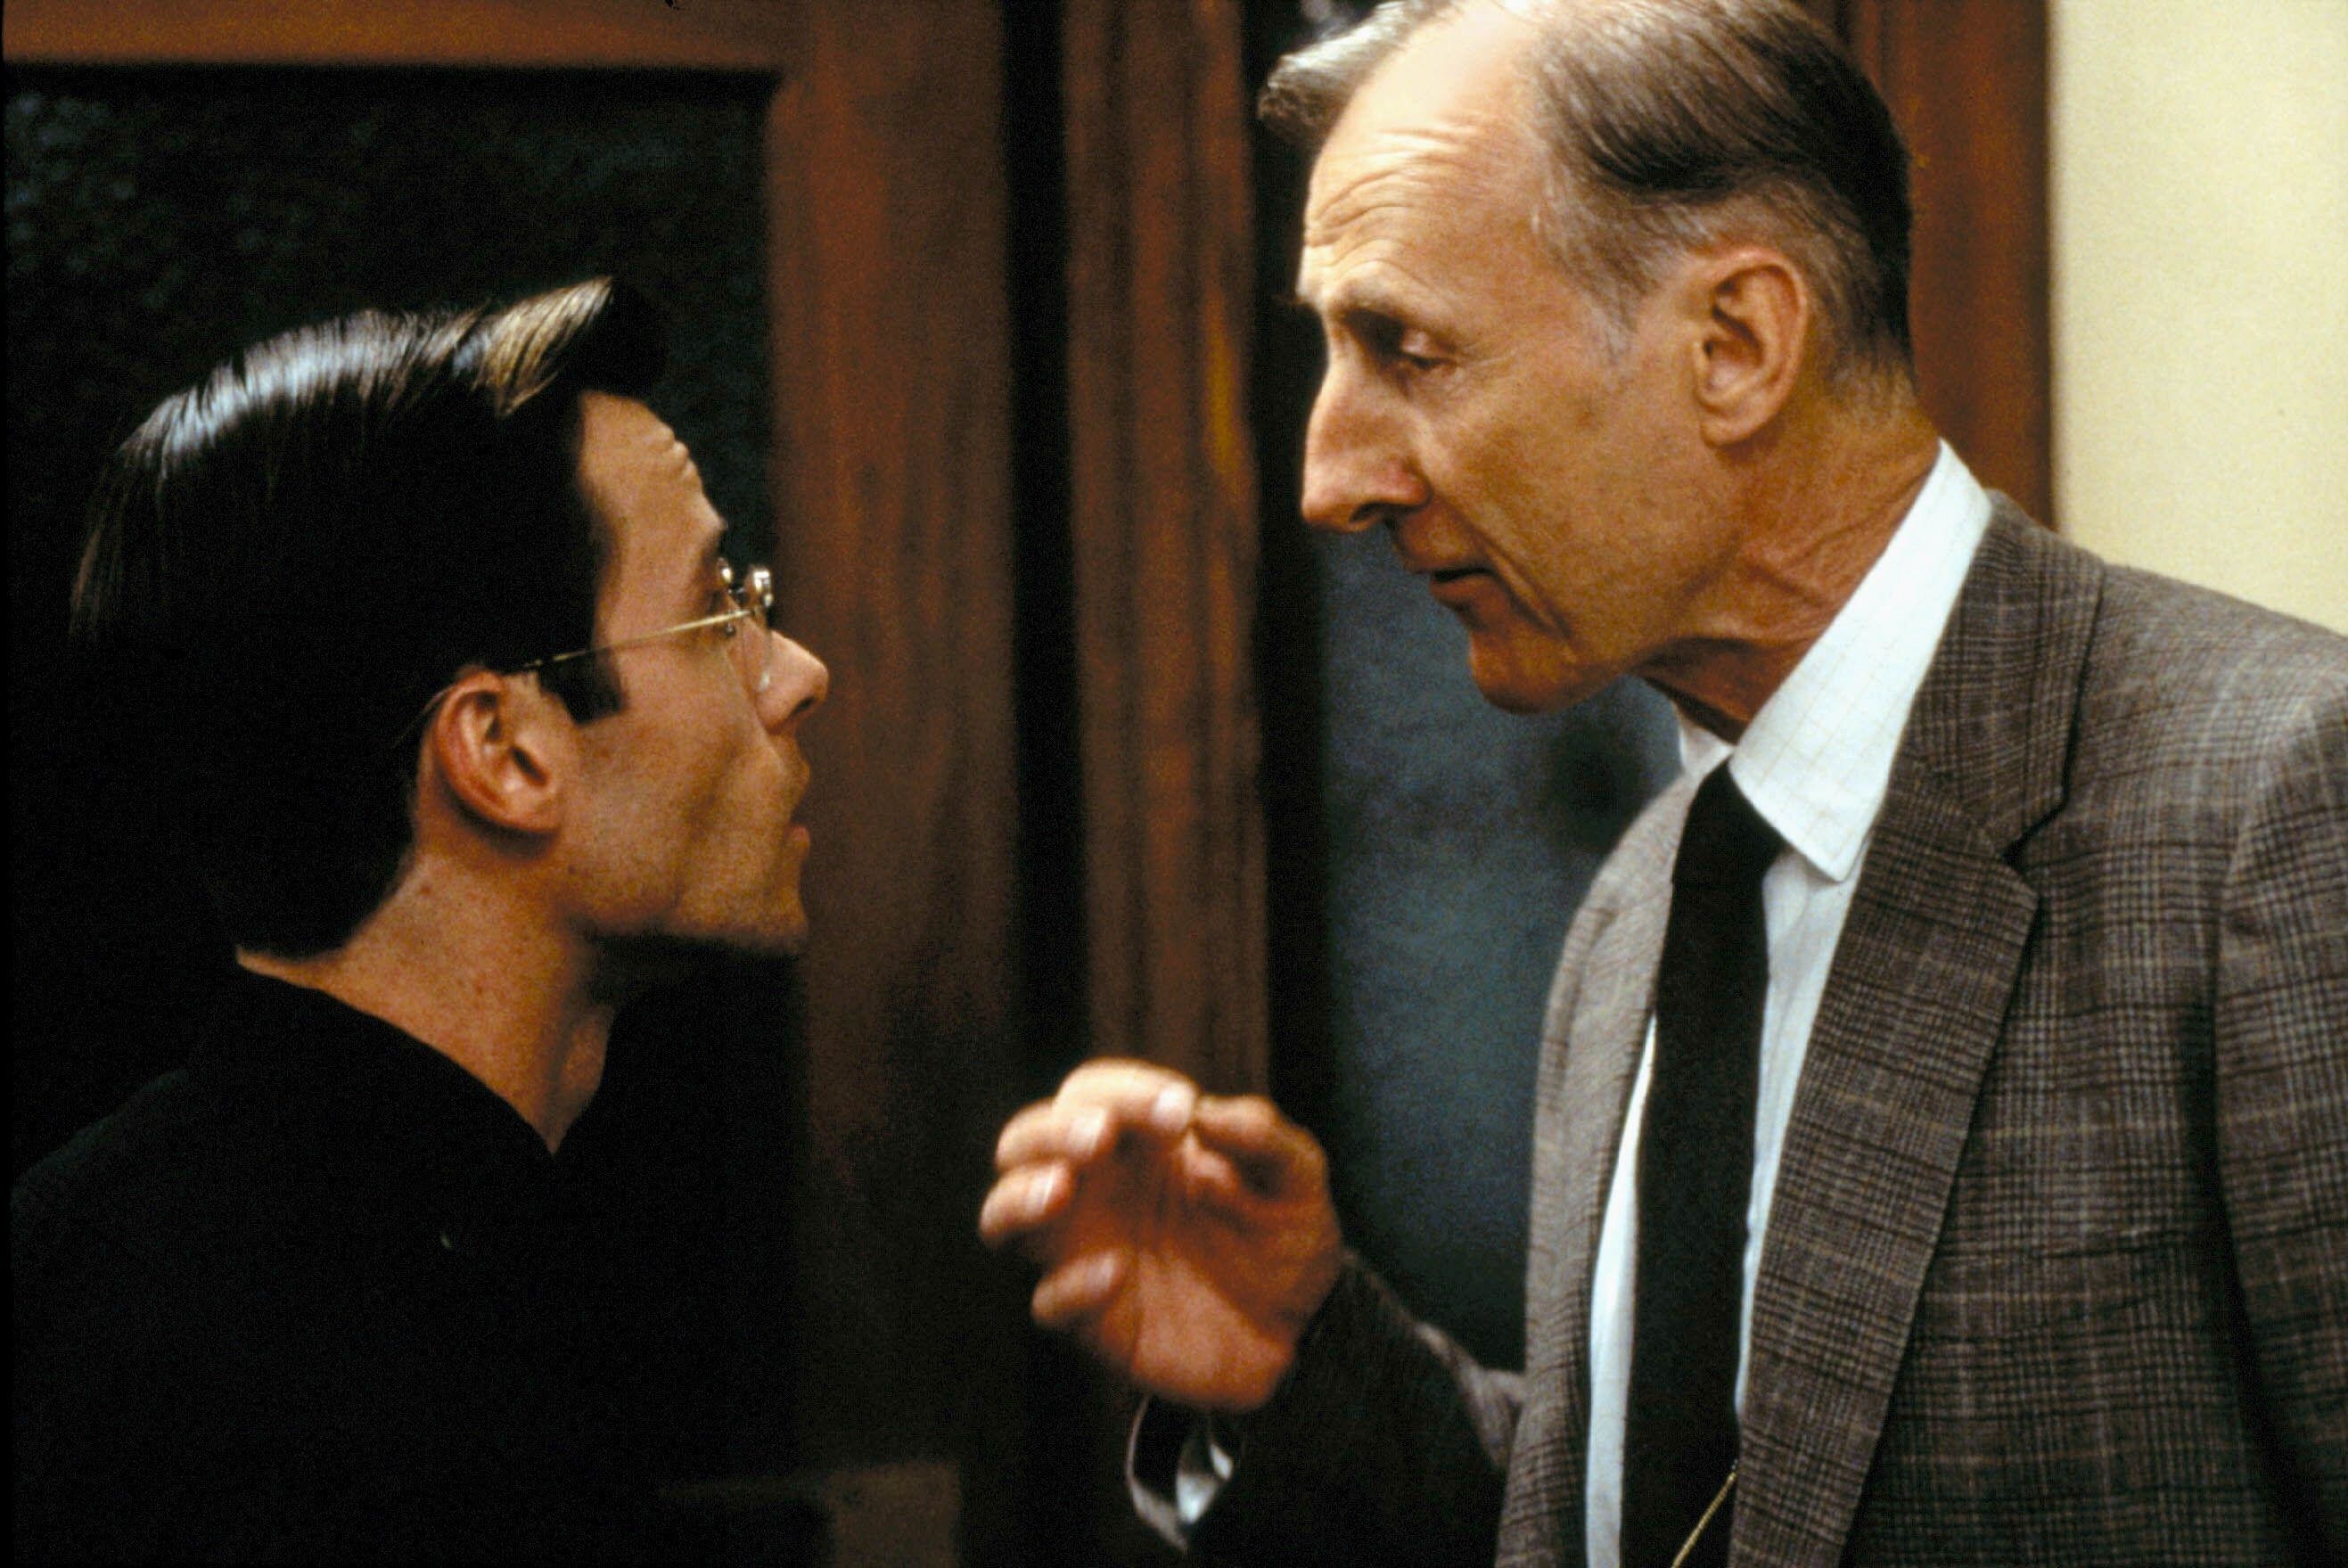 James Cromwell in a suit talks succinctly to Guy Pearce